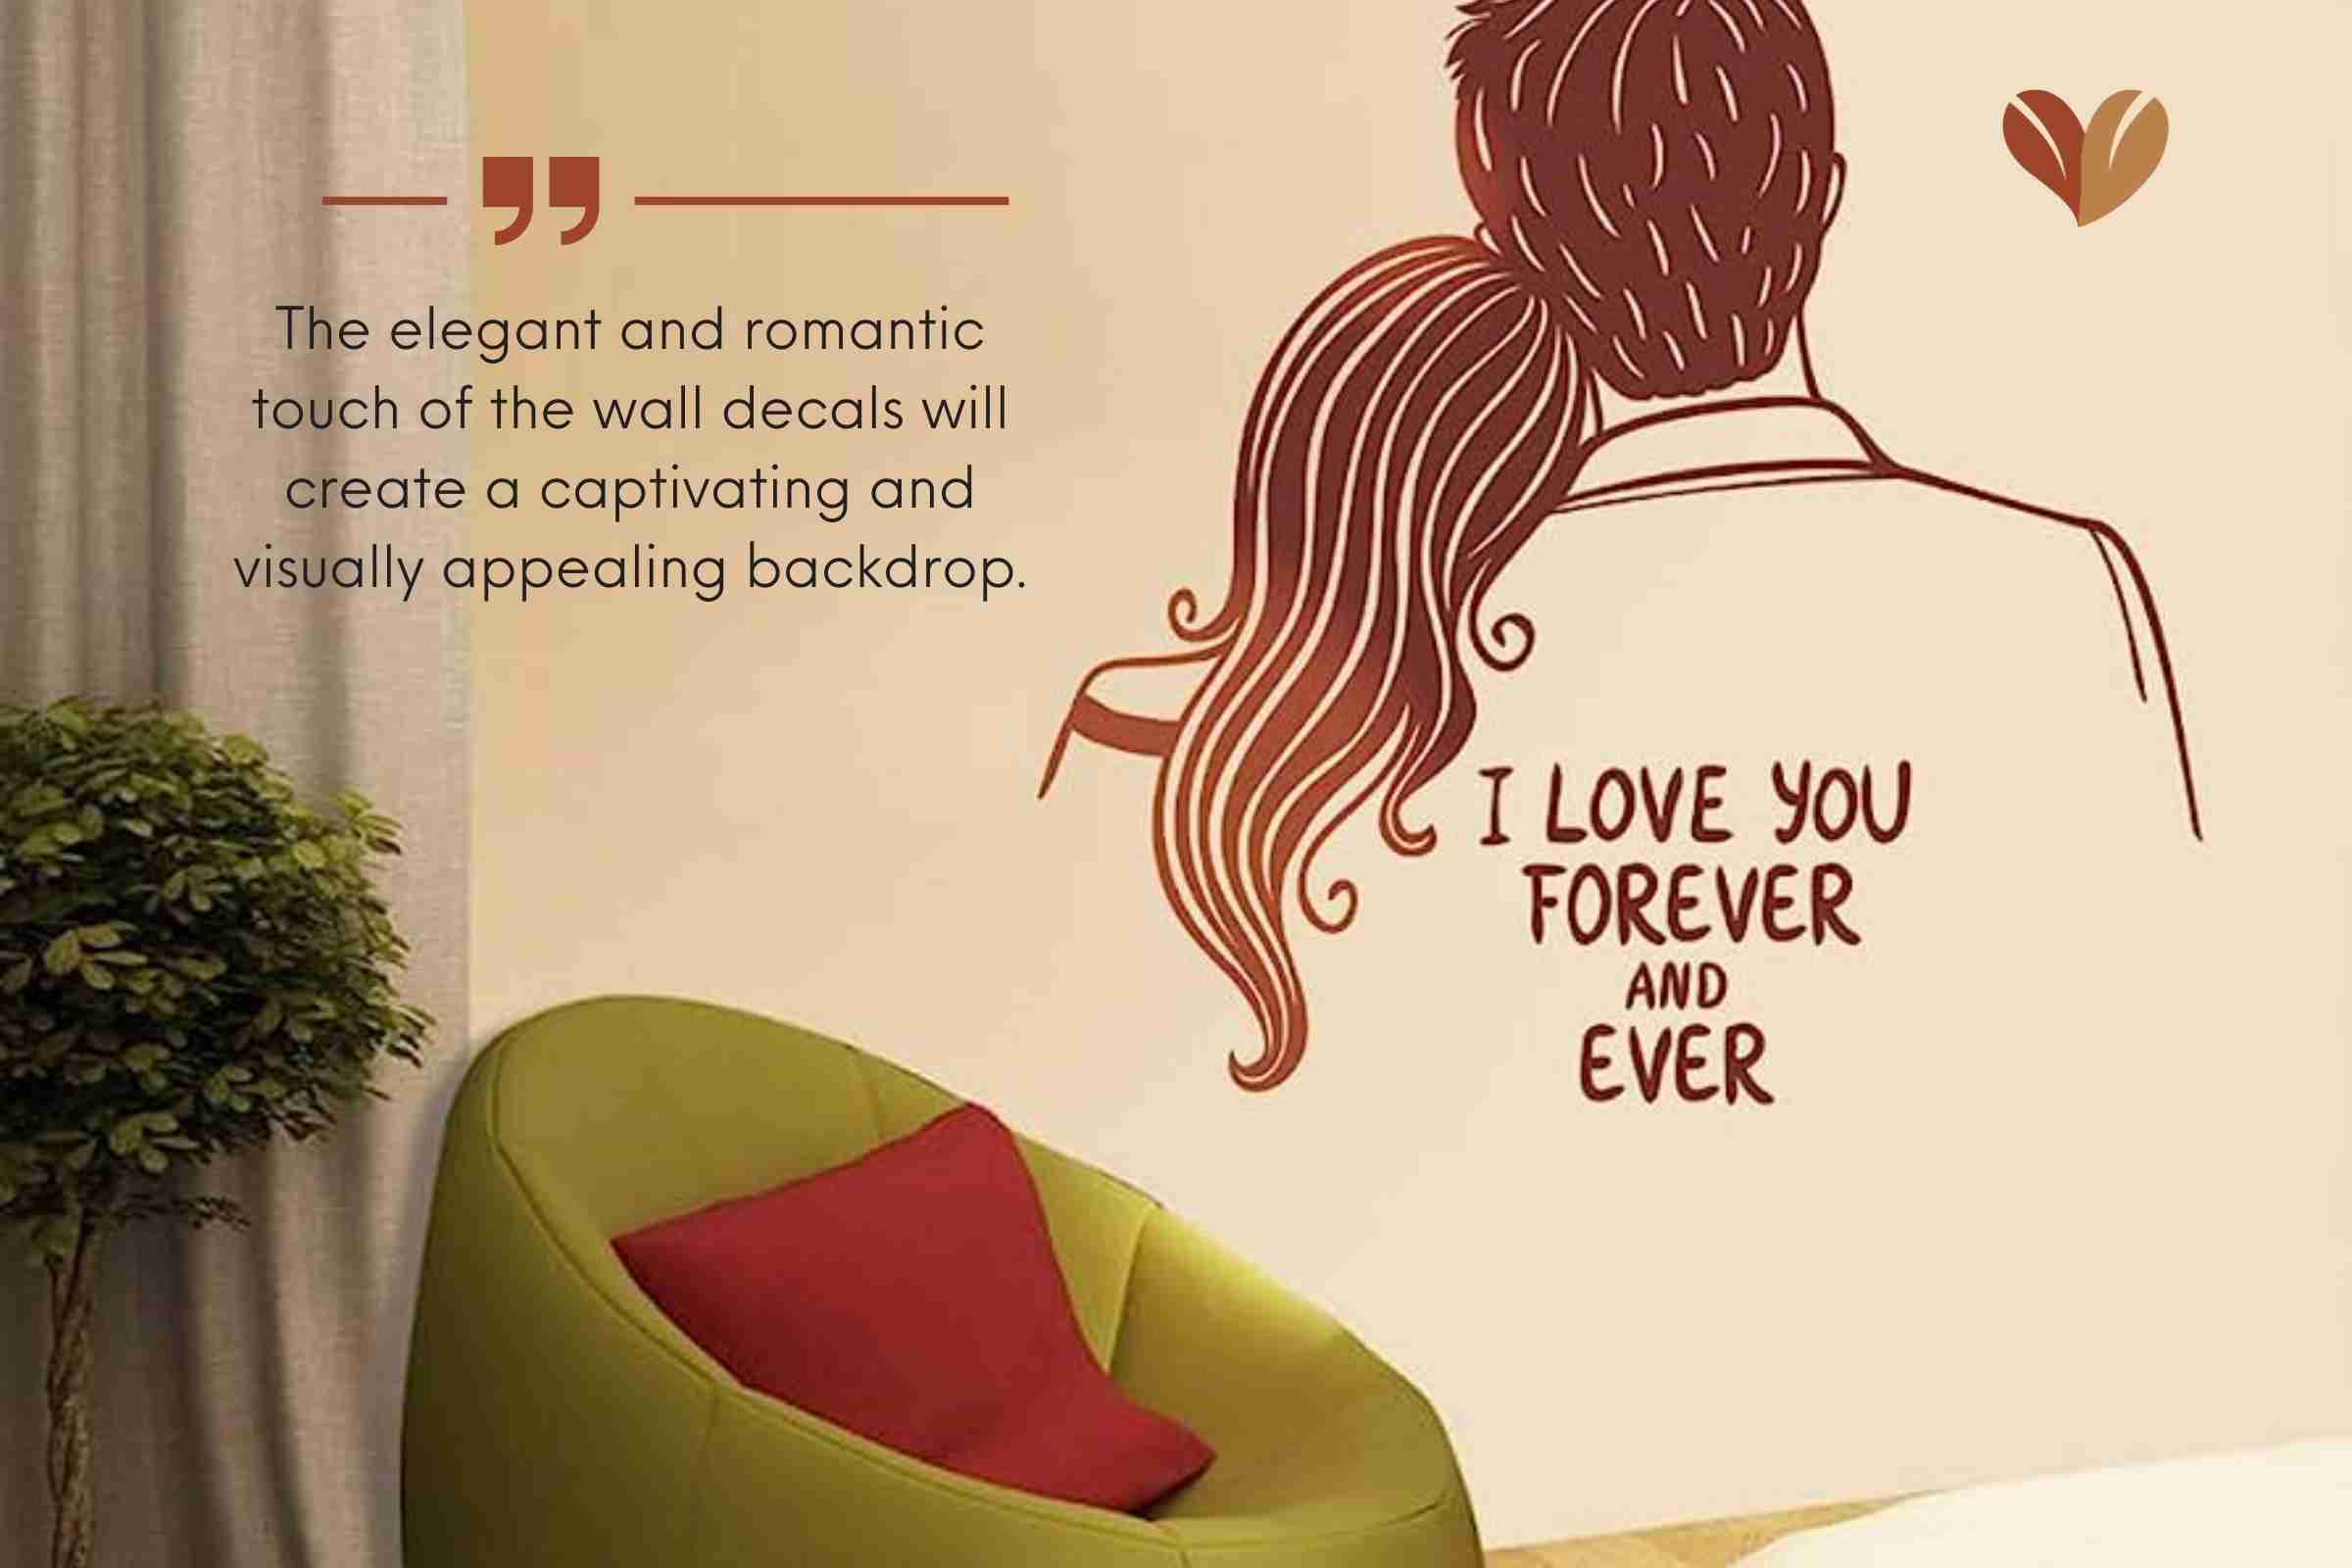 The elegant and romantic touch of the wall decals will be the best custom anniversary gifts